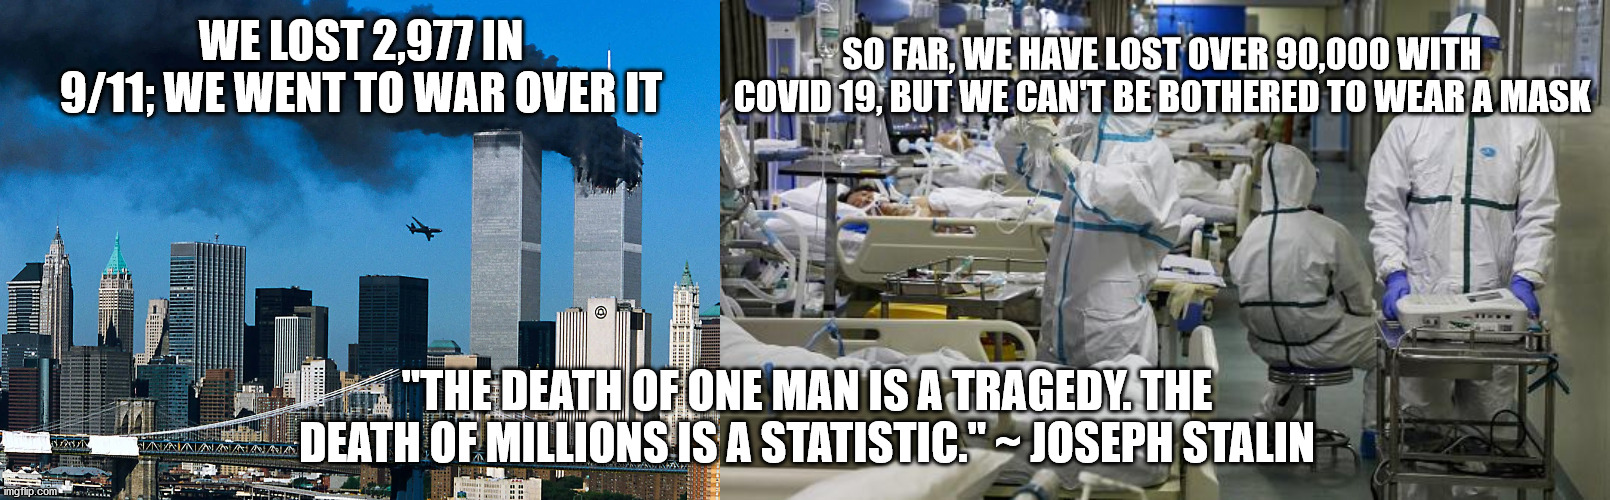 9/11 vs covidd 19 | SO FAR, WE HAVE LOST OVER 90,000 WITH COVID 19, BUT WE CAN'T BE BOTHERED TO WEAR A MASK; WE LOST 2,977 IN 9/11; WE WENT TO WAR OVER IT; "THE DEATH OF ONE MAN IS A TRAGEDY. THE DEATH OF MILLIONS IS A STATISTIC." ~ JOSEPH STALIN | image tagged in covid,9/11,afghanistan,stalin,mask | made w/ Imgflip meme maker